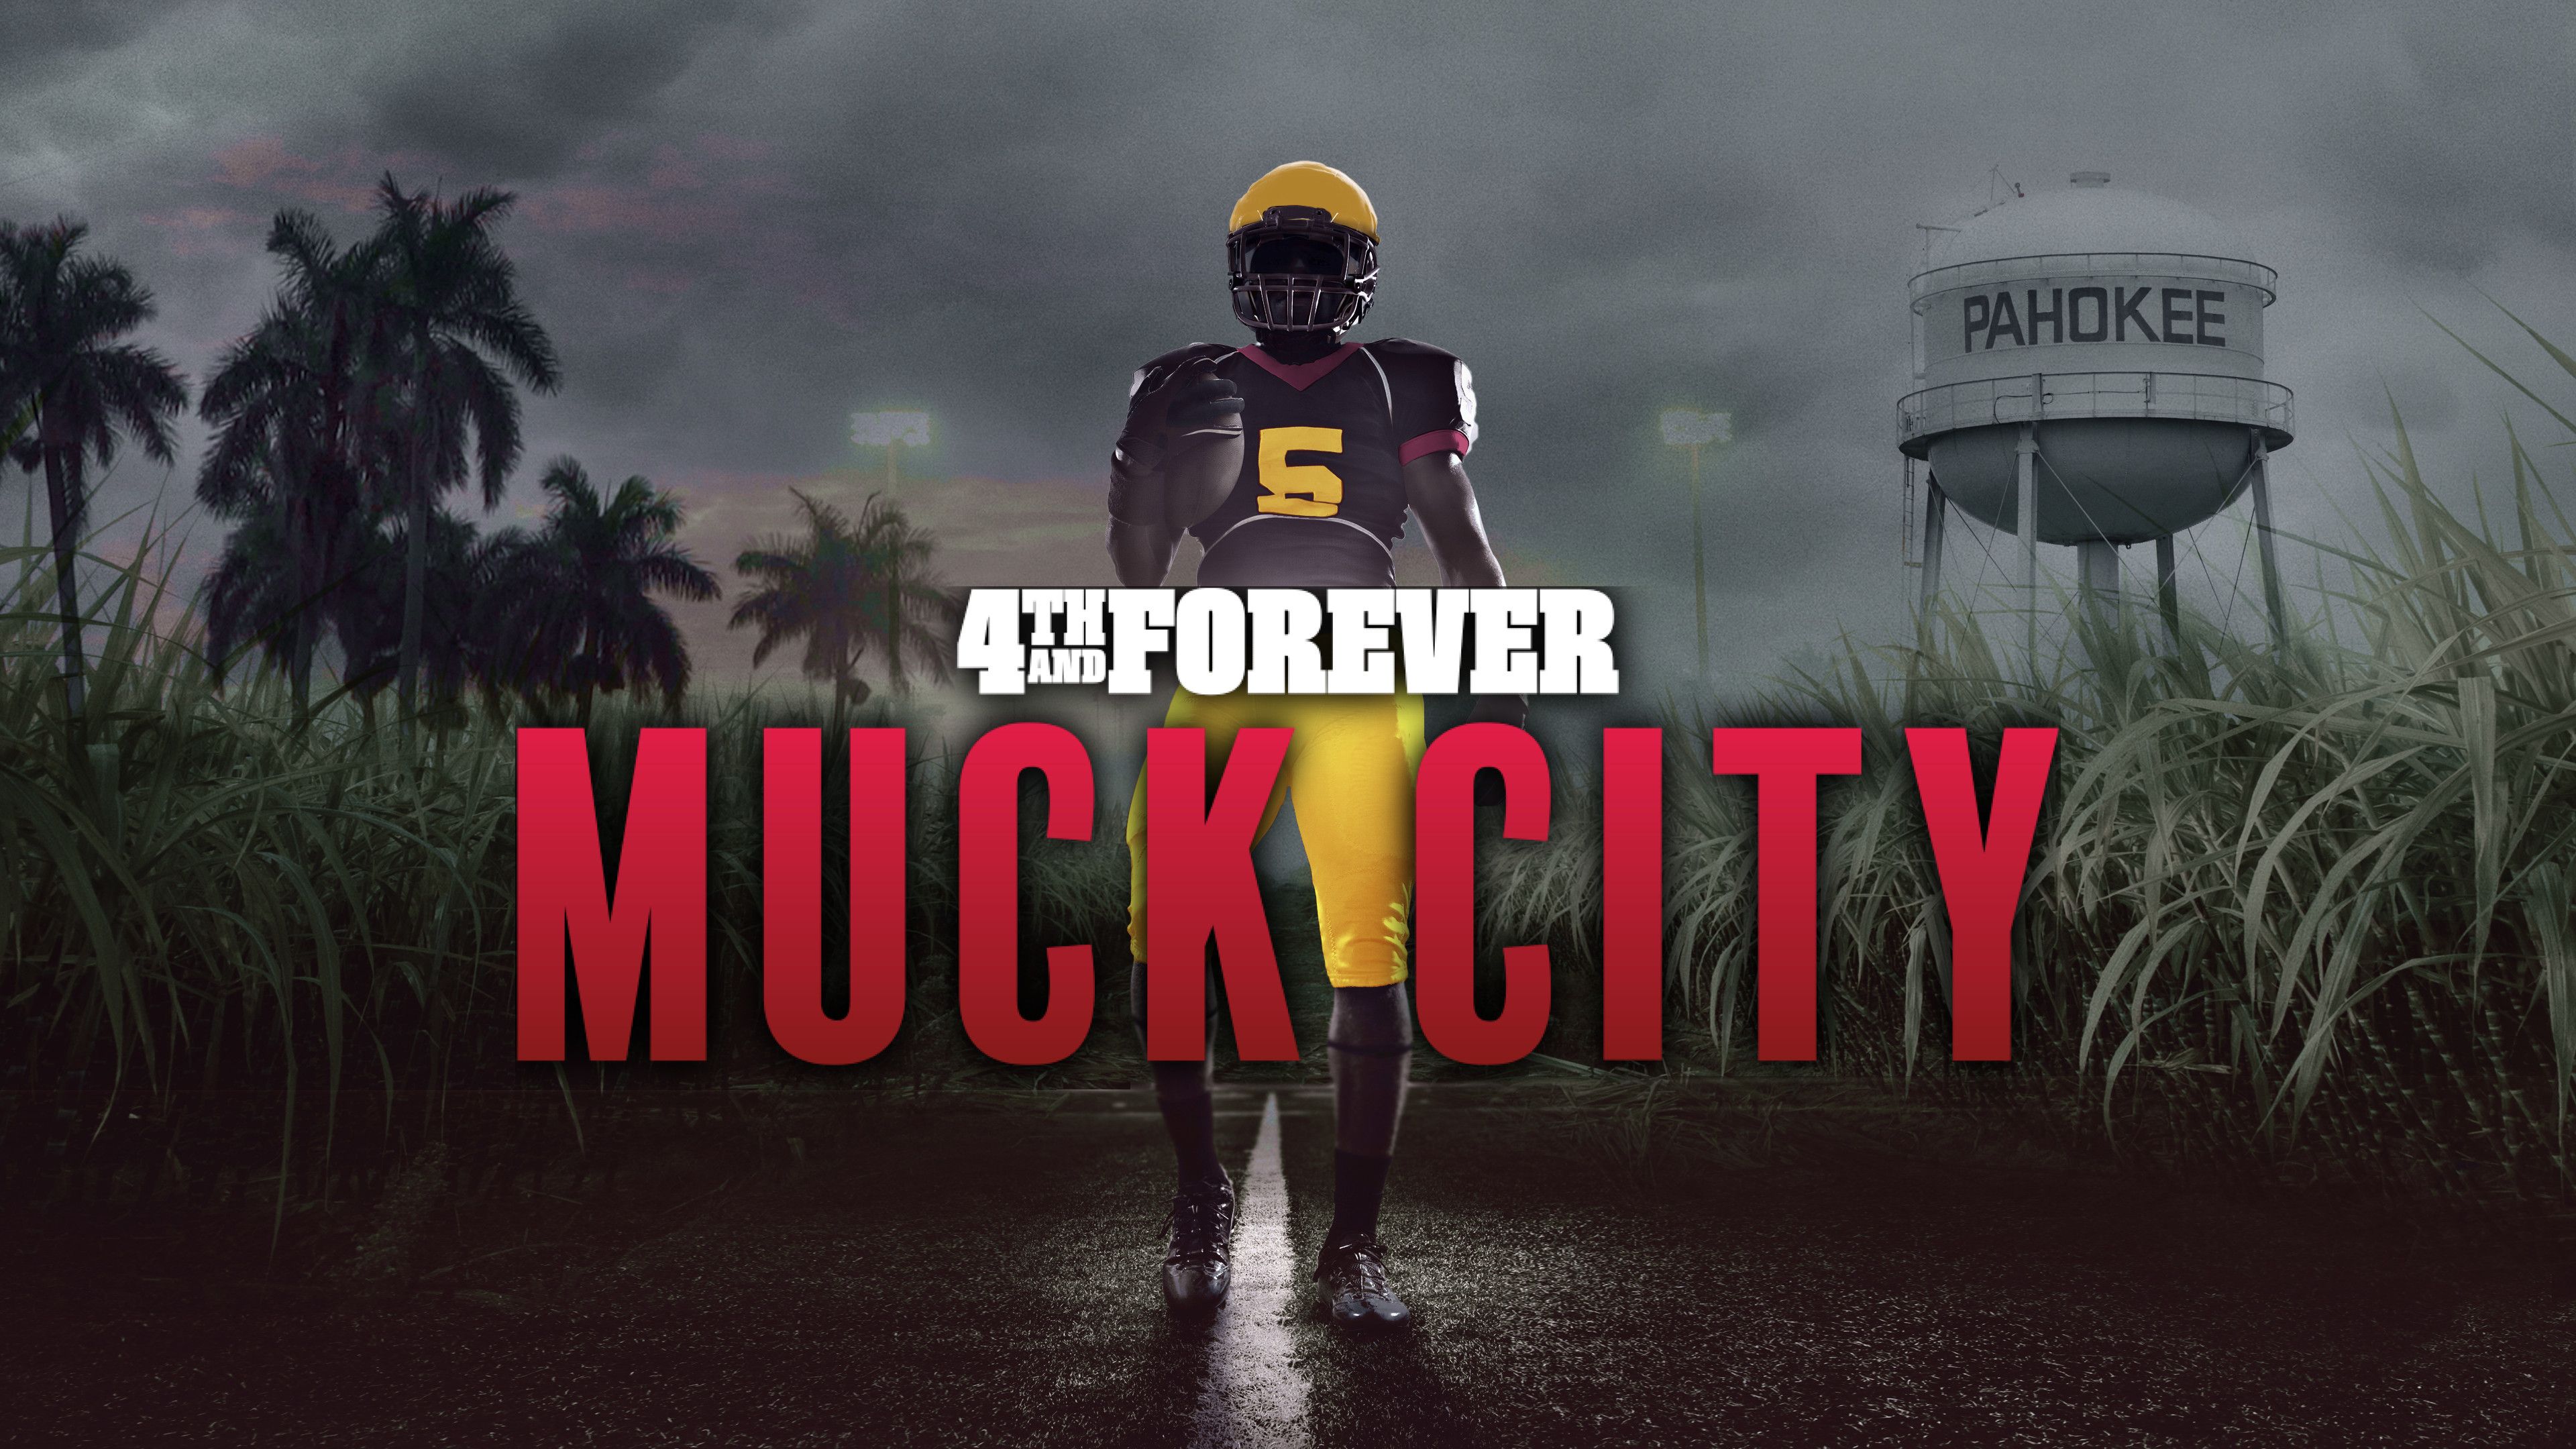 4th & Forever: Muck City